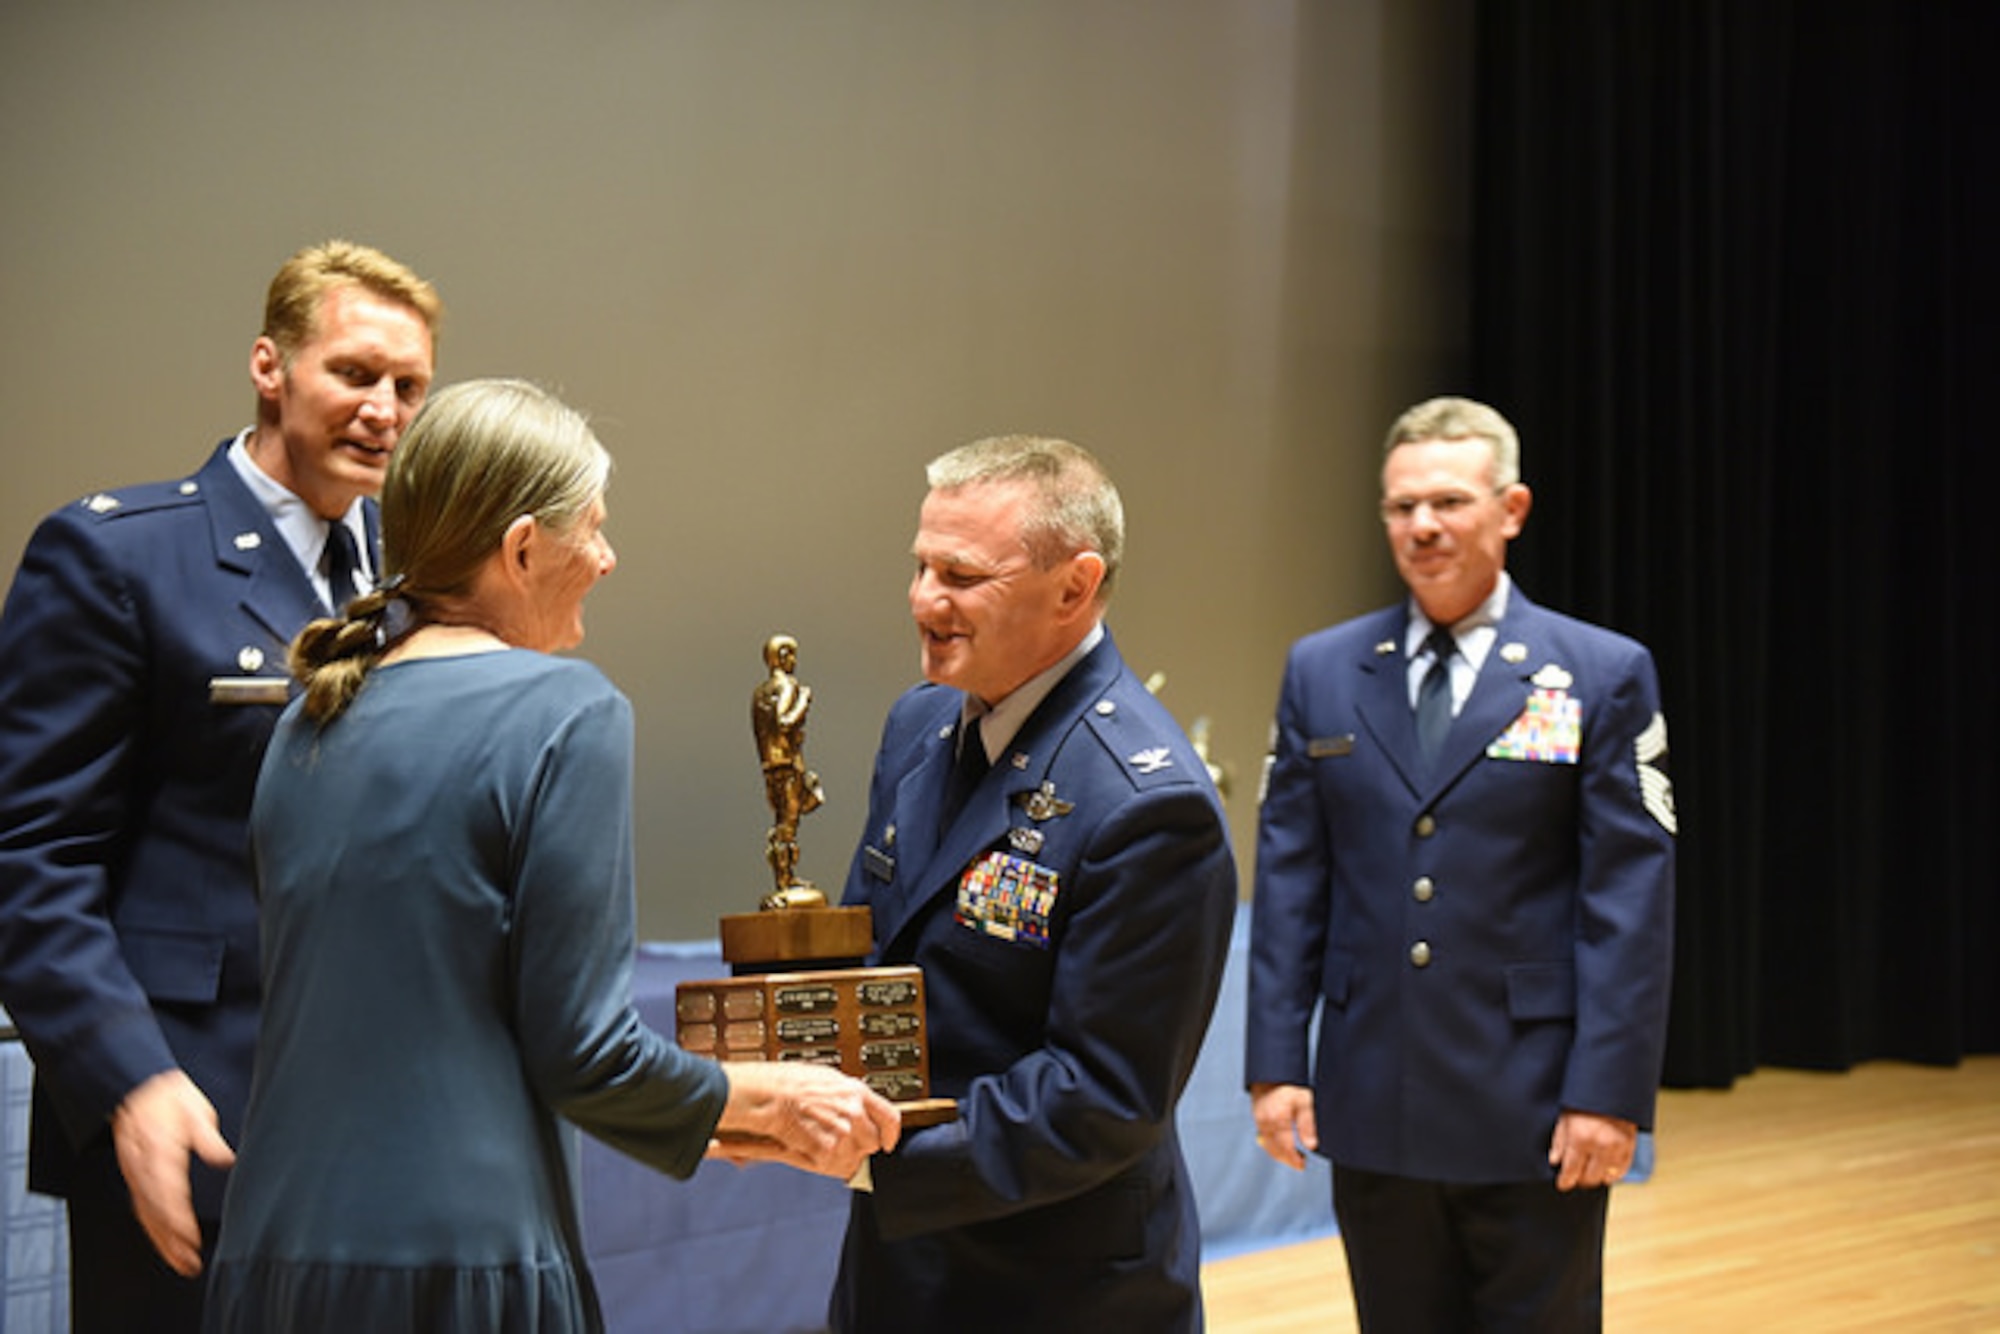 JOINT BASE ELMENDORF-RICHARDSON, Alaska -- Members of the 176th Wing gathered at the Talkeetna Theater here June 5 for their annual award ceremony, honoring the award recipients and the accomplishments of the wing during 2015.